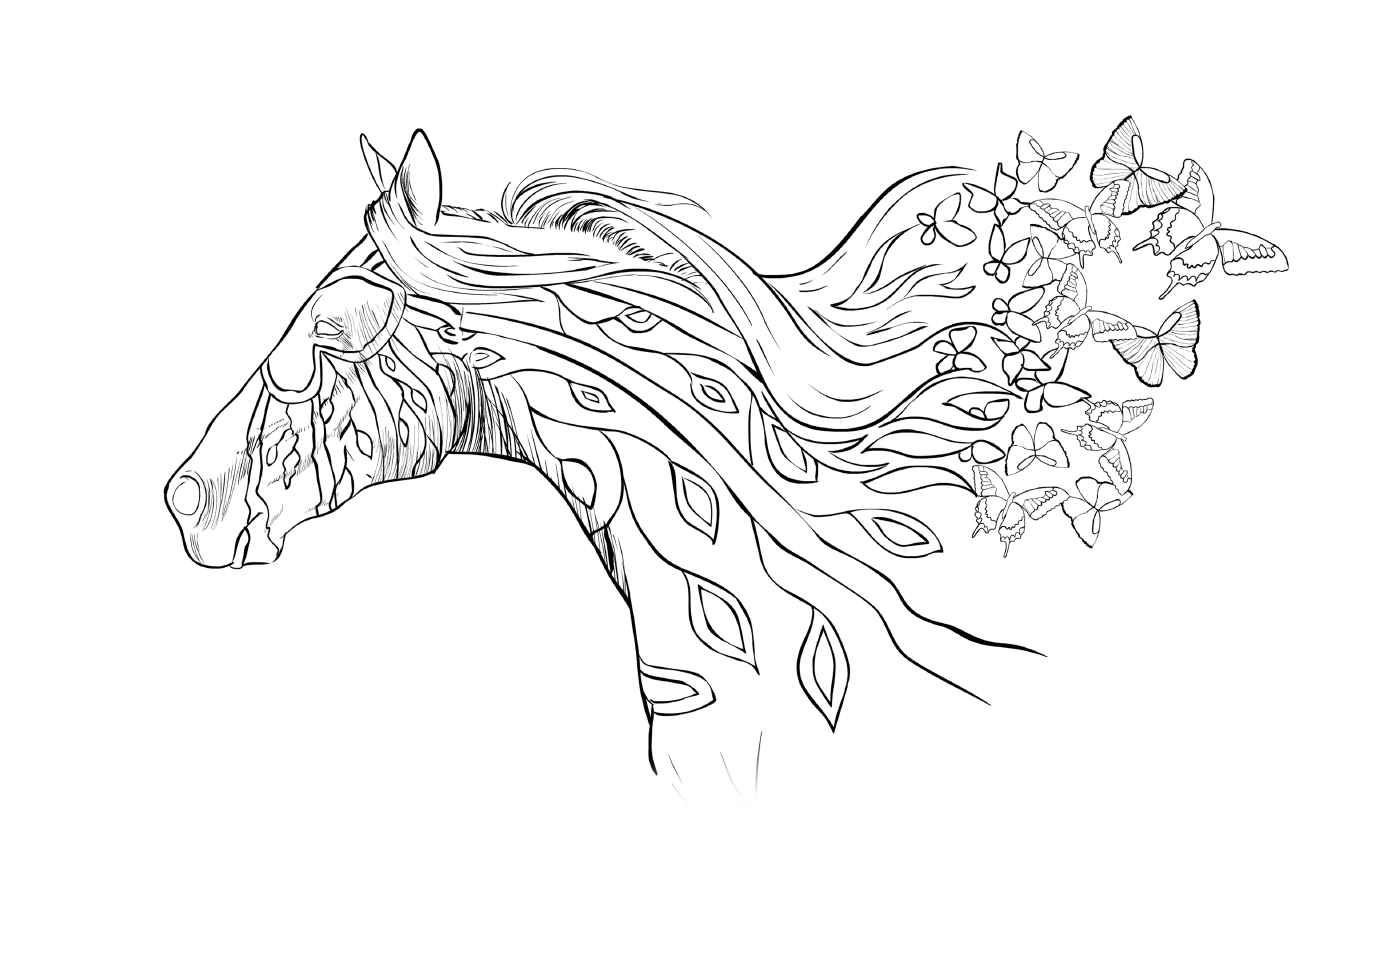  The head of a horse with flowers in his hair 